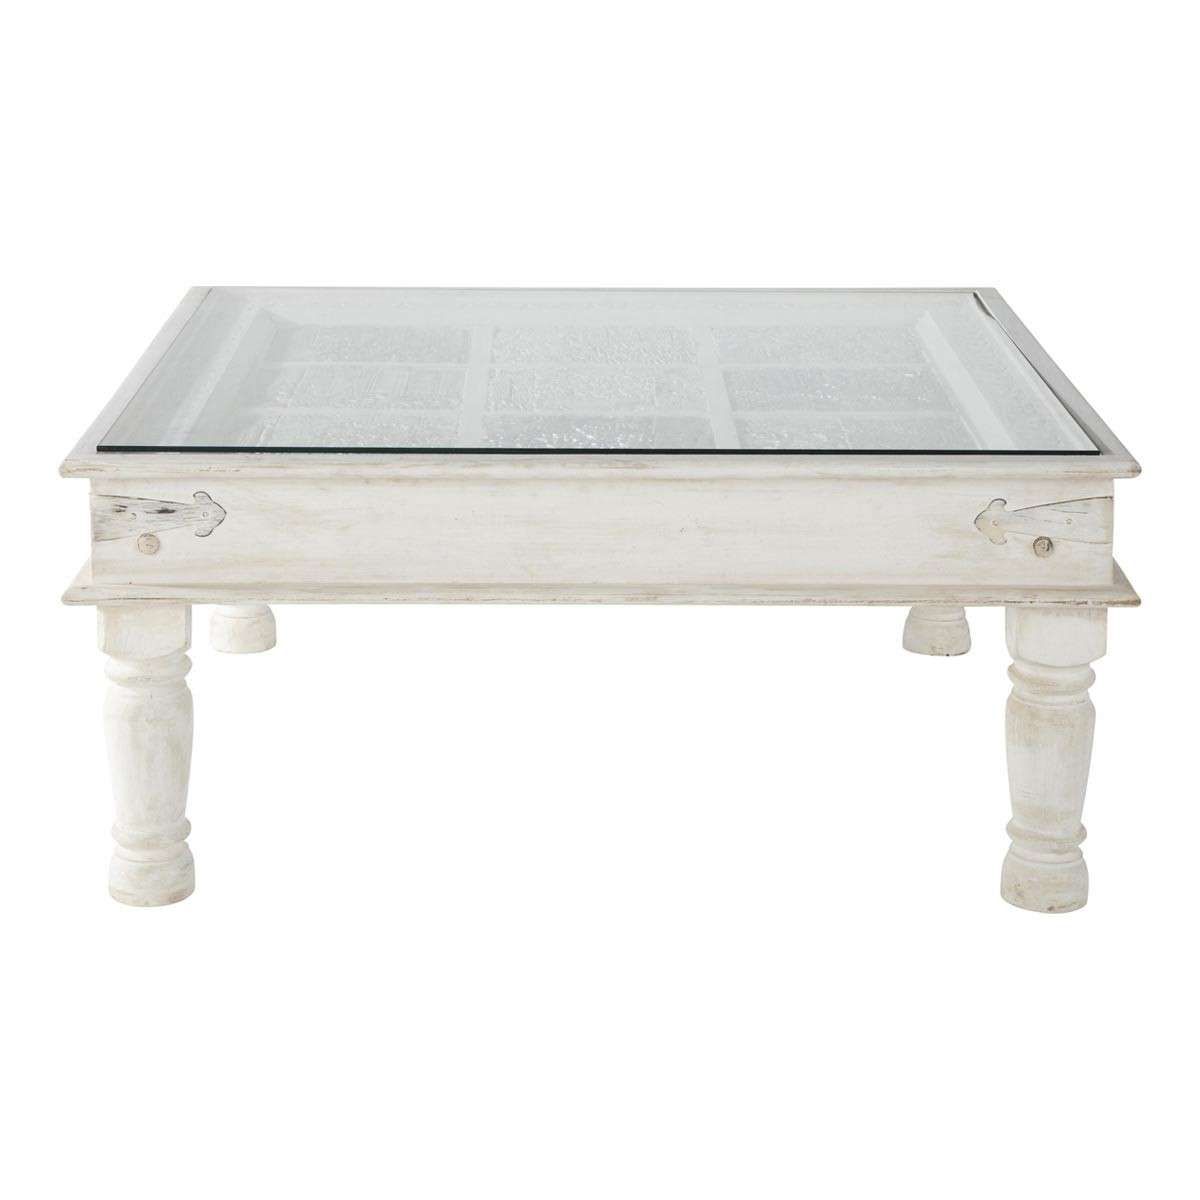 French Country Carved Wood Square White Coffee Table With Glass Pertaining To Well Liked Square White Coffee Tables (Gallery 11 of 20)